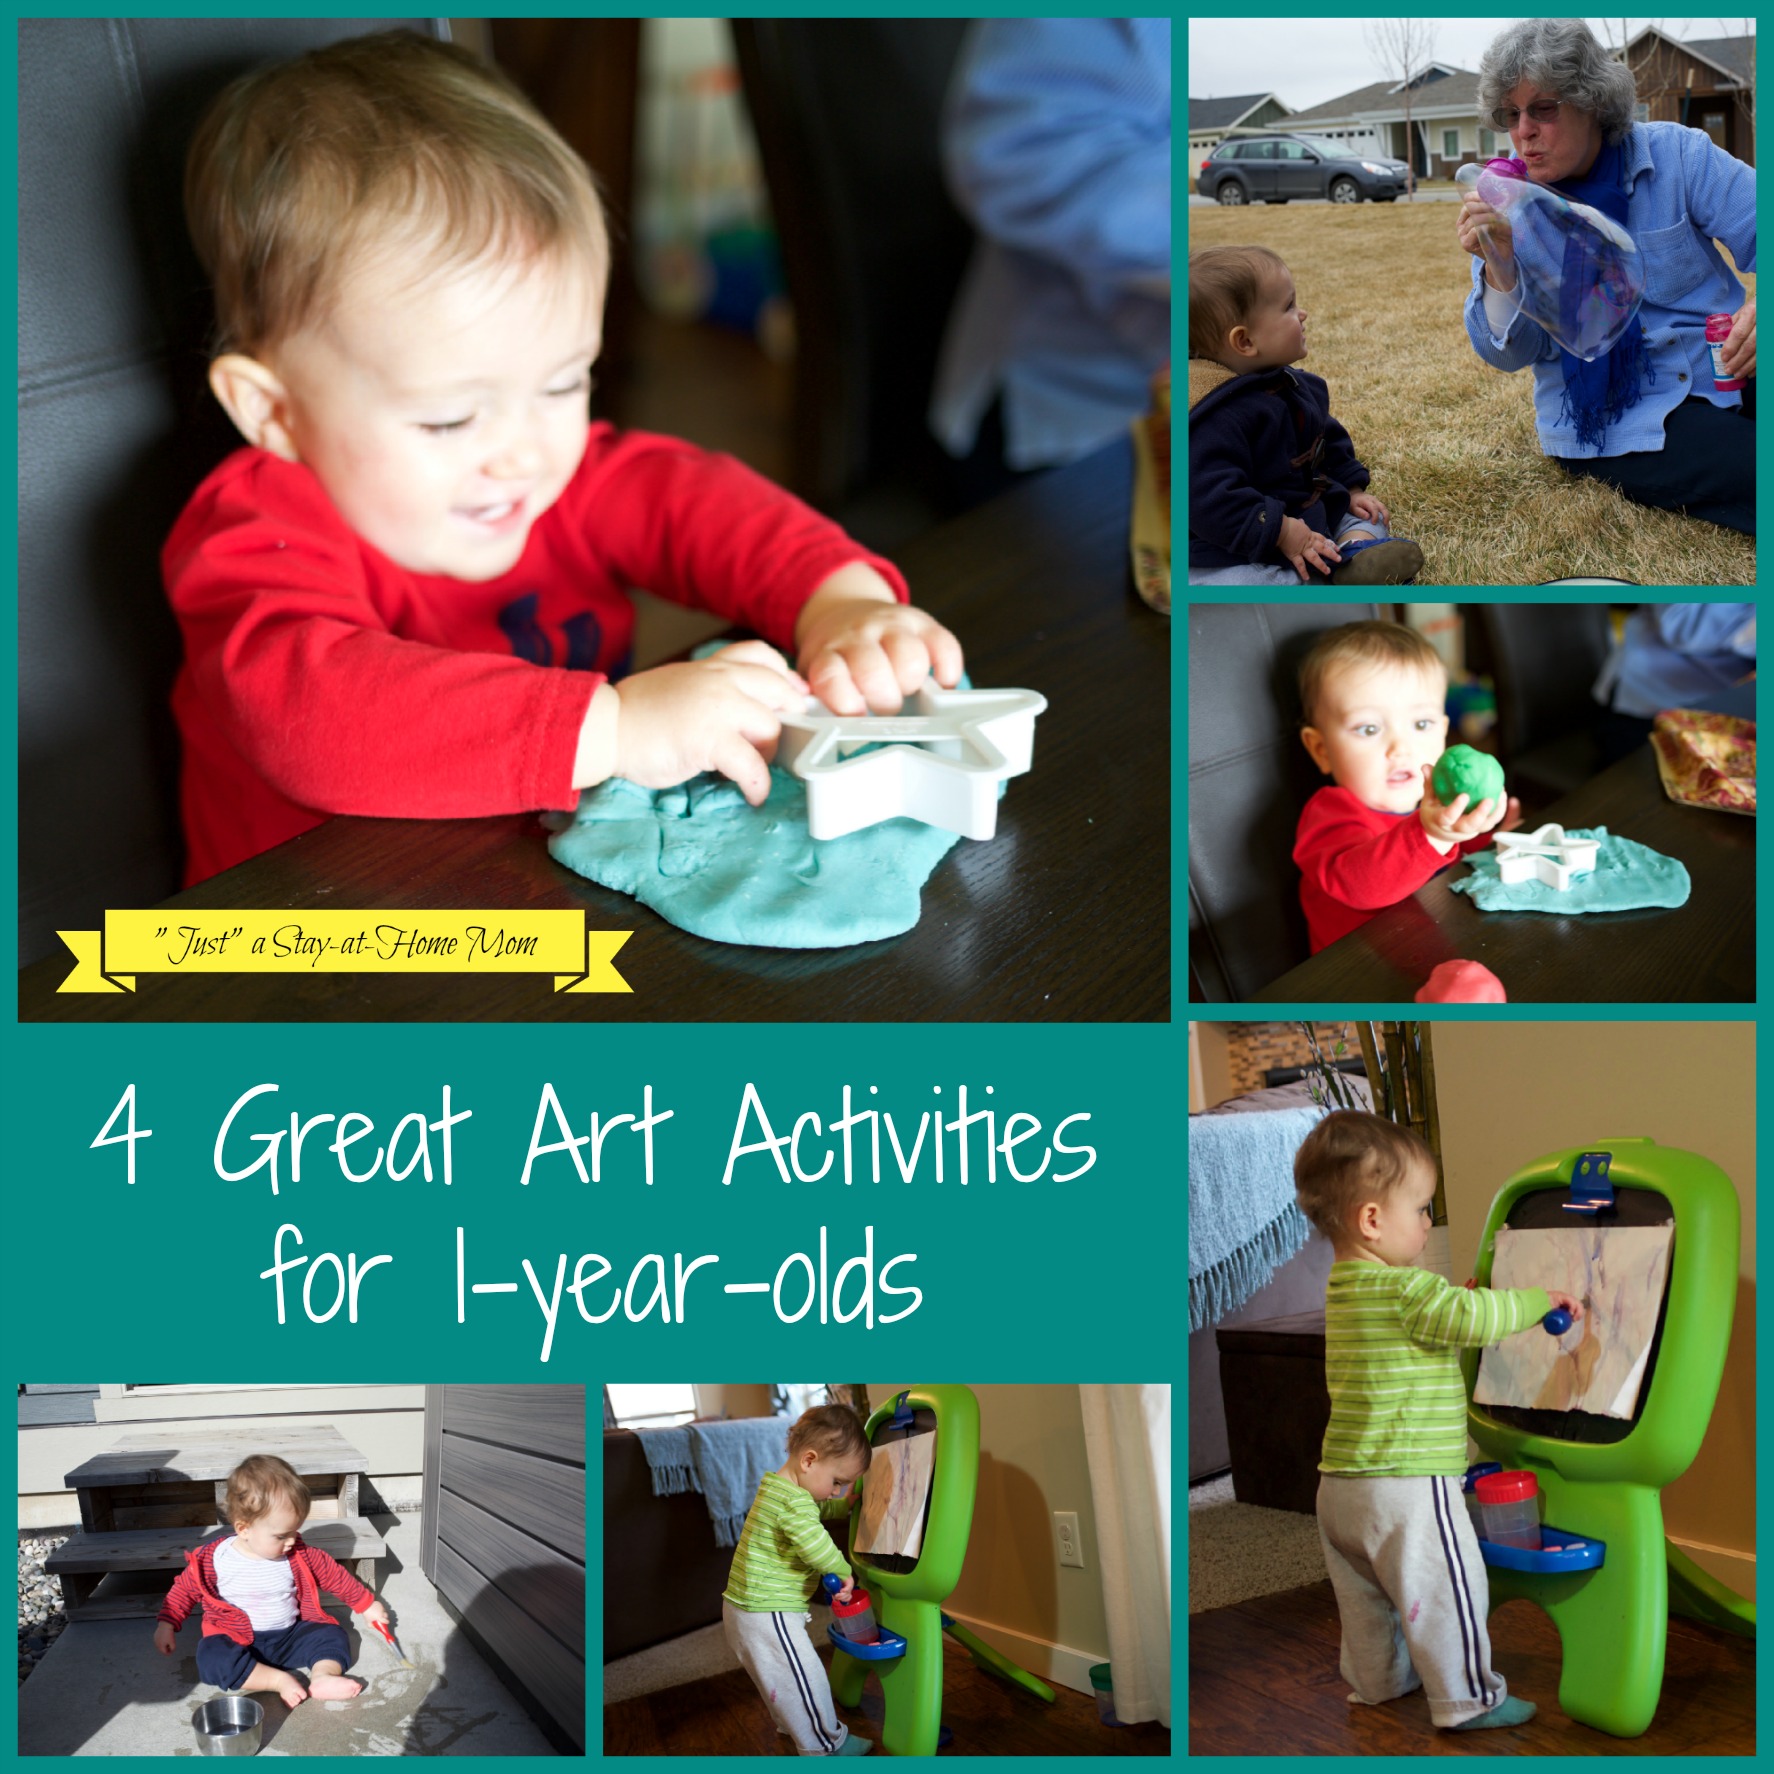 DIY crafts you can do with a 1-year-old